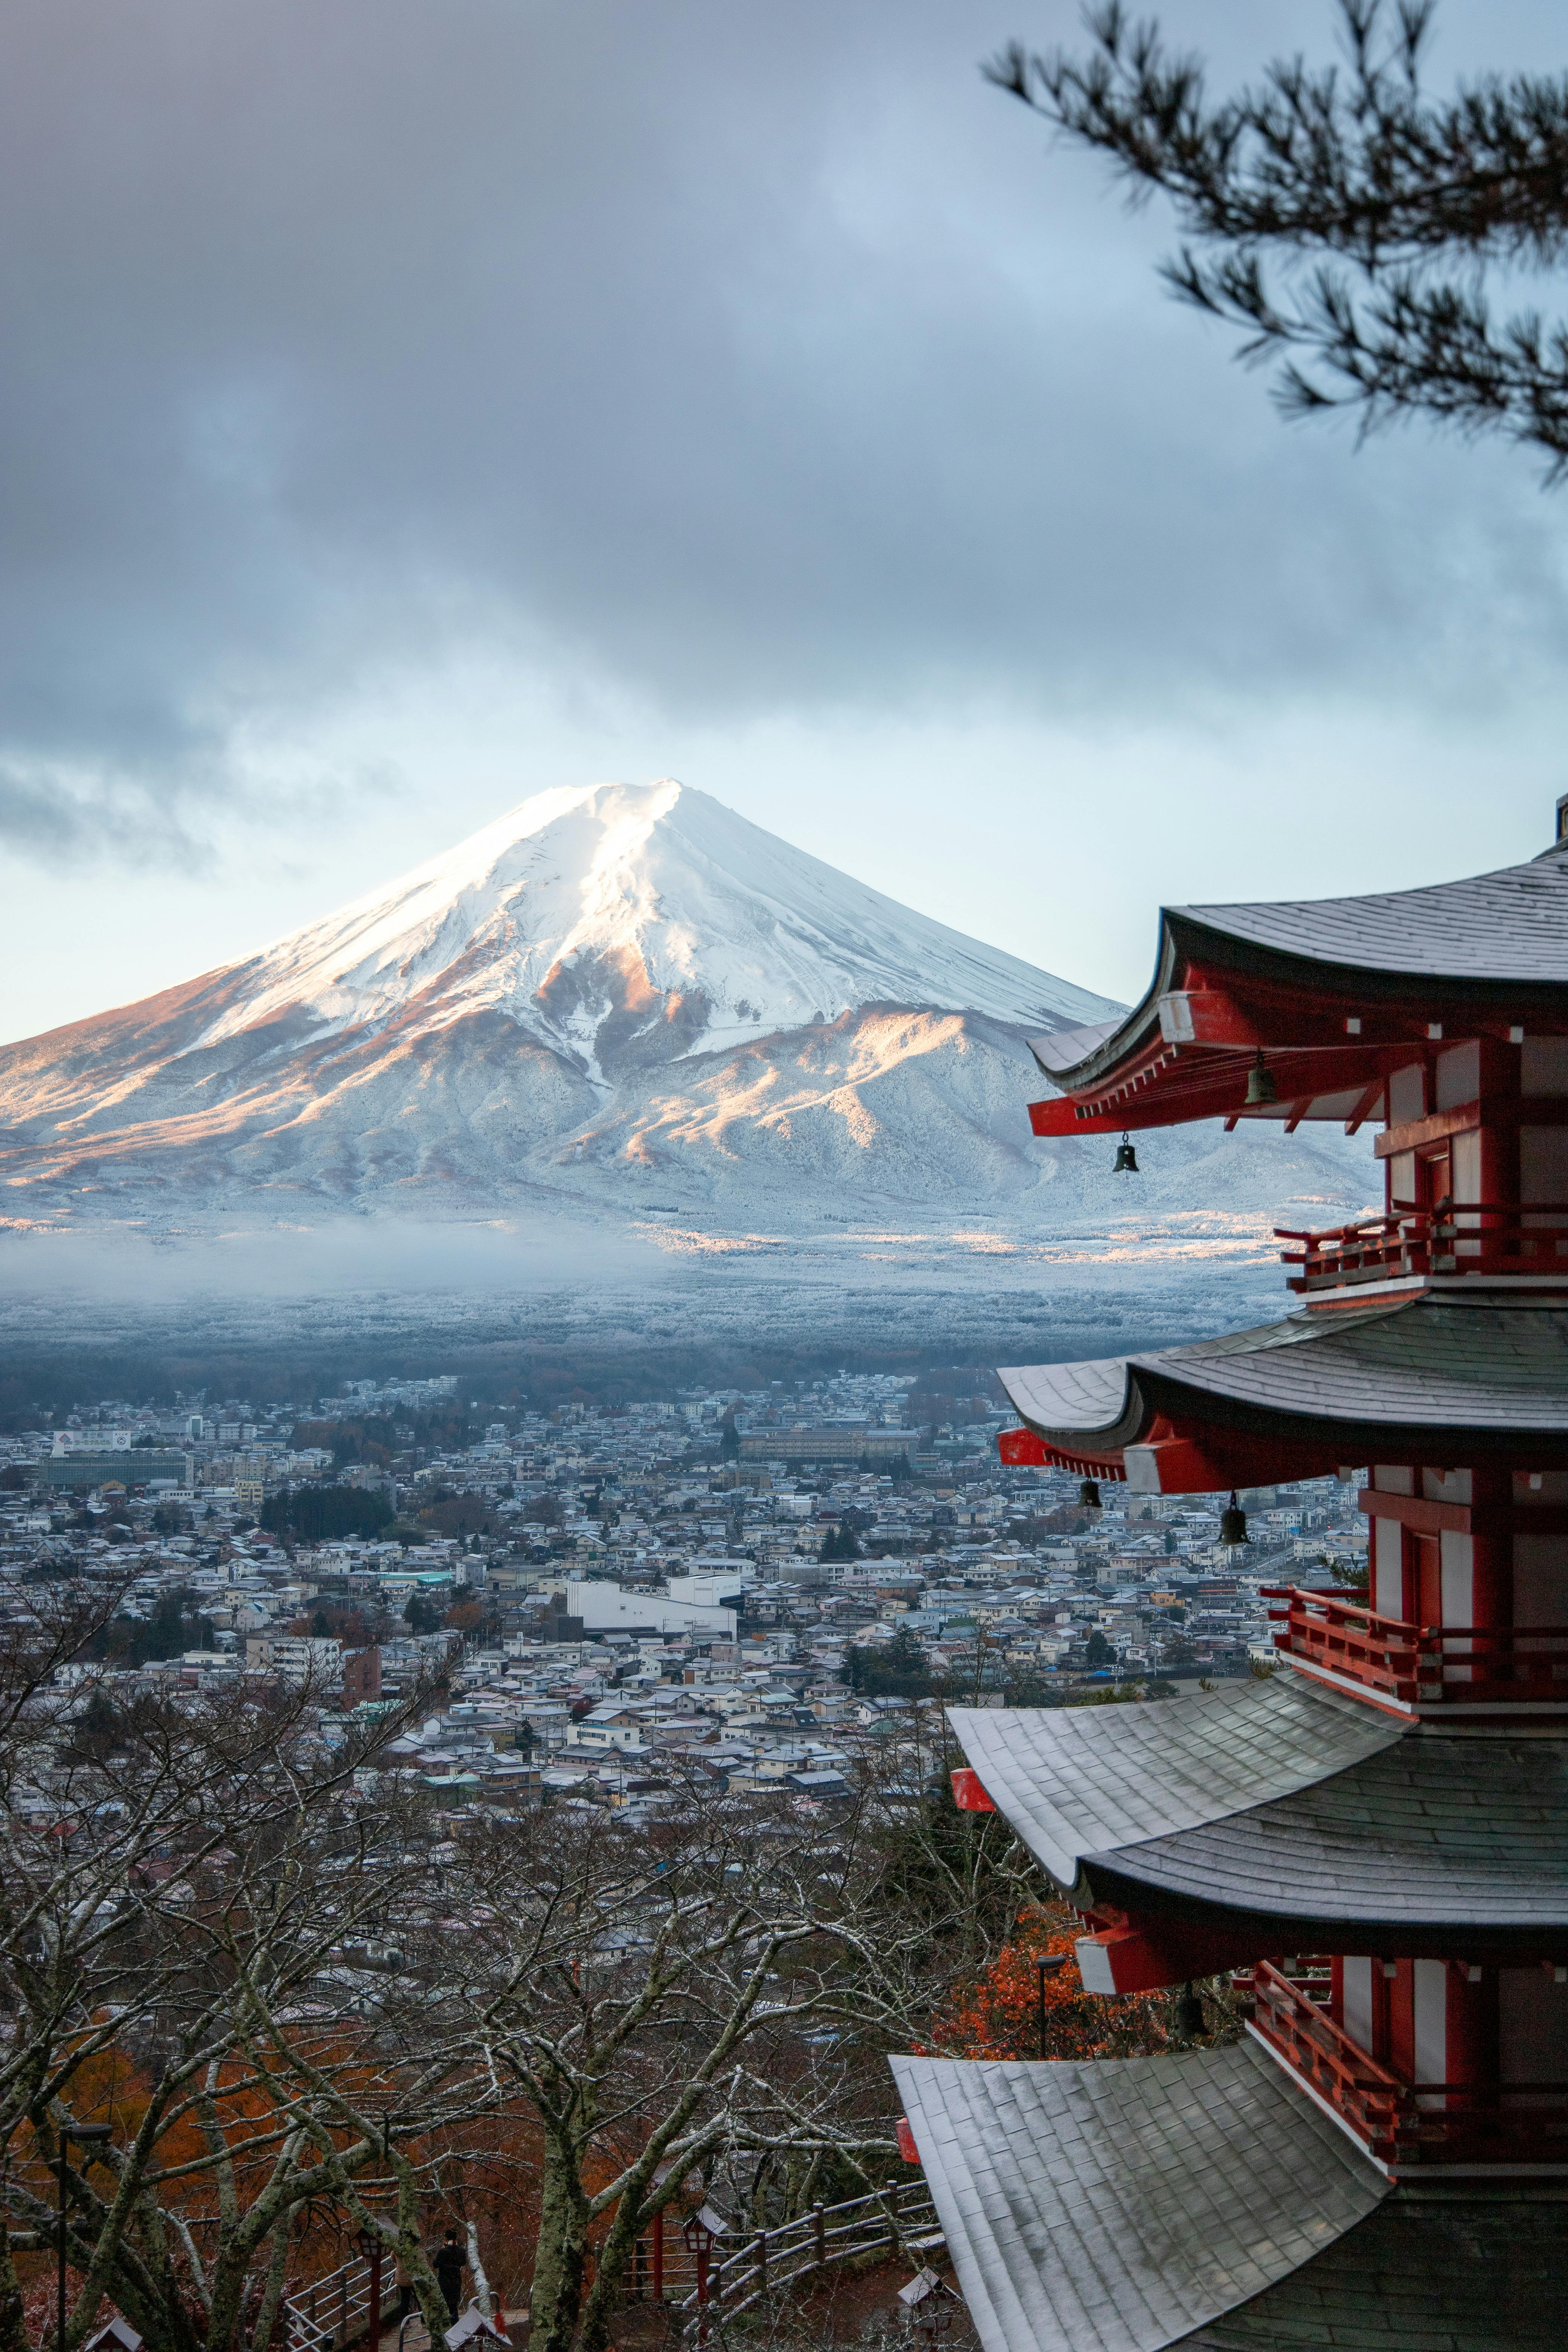 Download "Japan" wallpapers for mobile phone, free "Japan" HD pictures